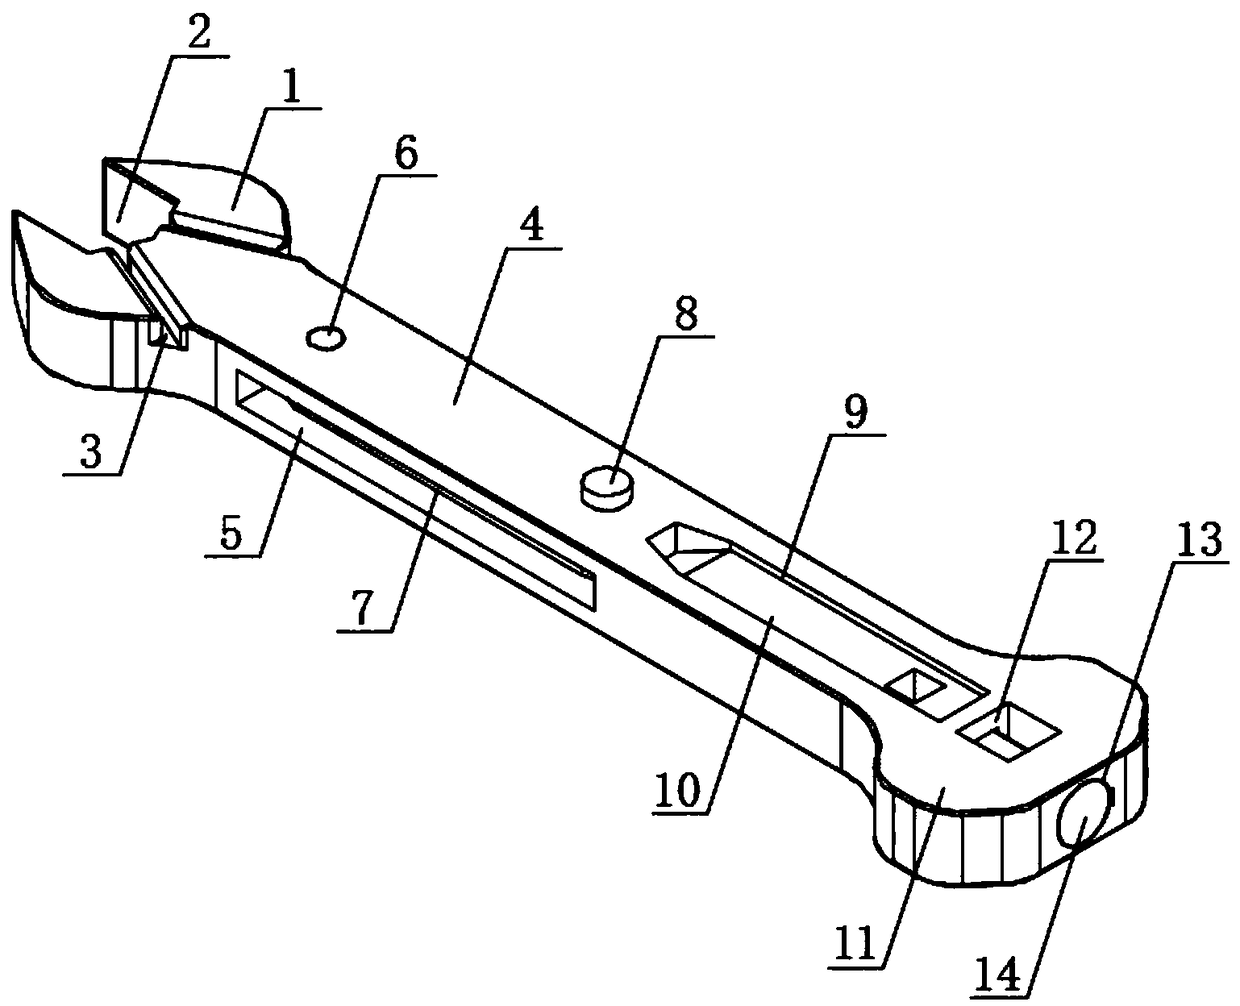 Double-head wrench capable of measuring locking clearance and being used for chiseling